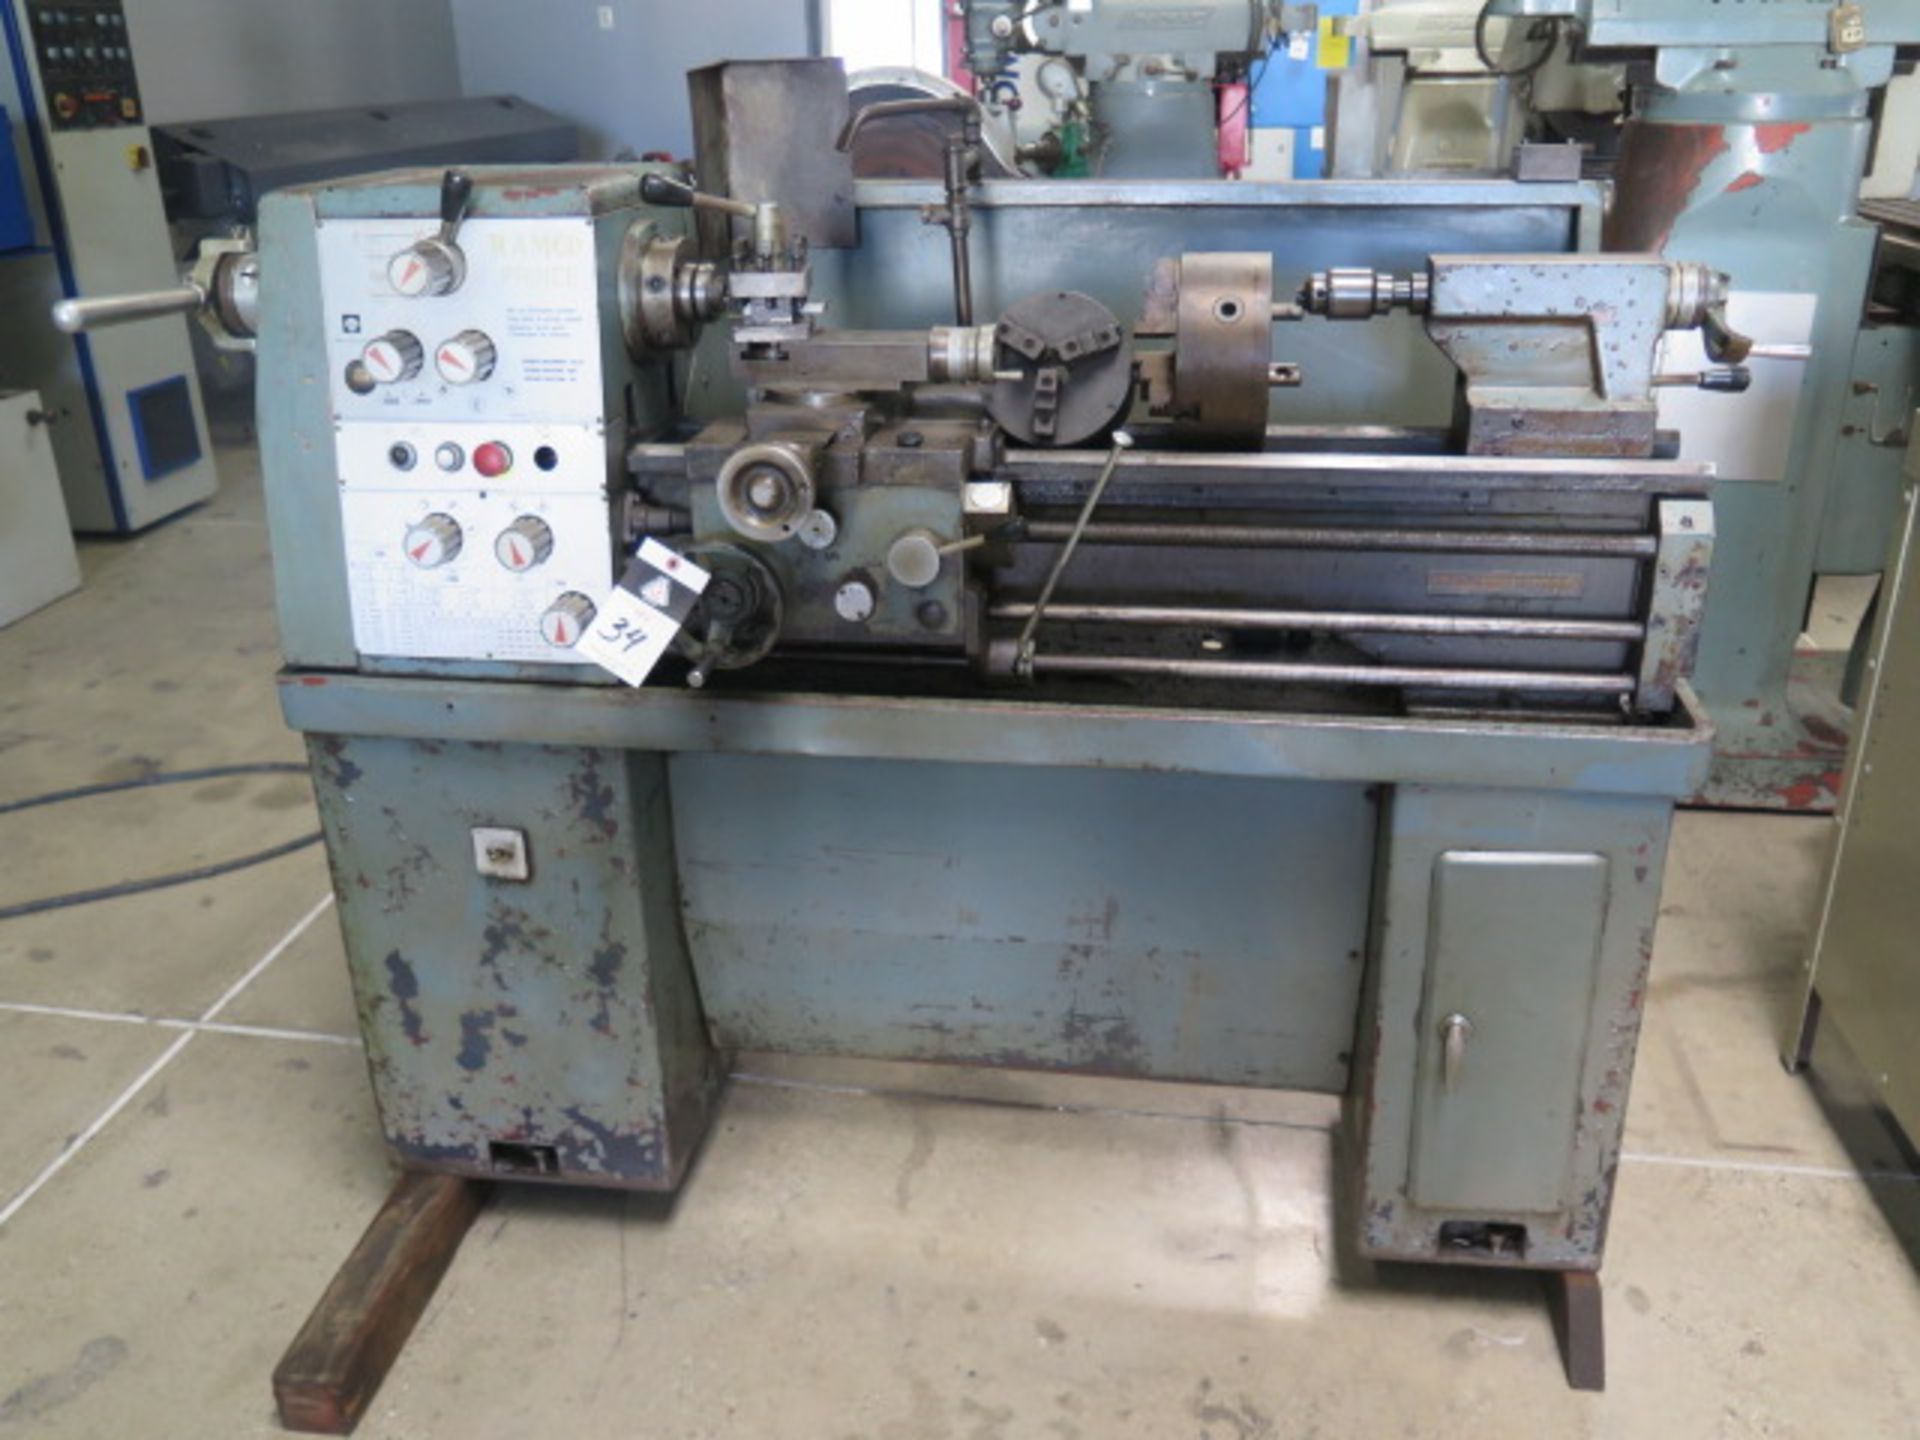 Ramco "Prince" 11" x 30" Geared Head Lathe s/n 4064 w/ 105-2000 RPM, Inch/mm Threading, Tailstock,